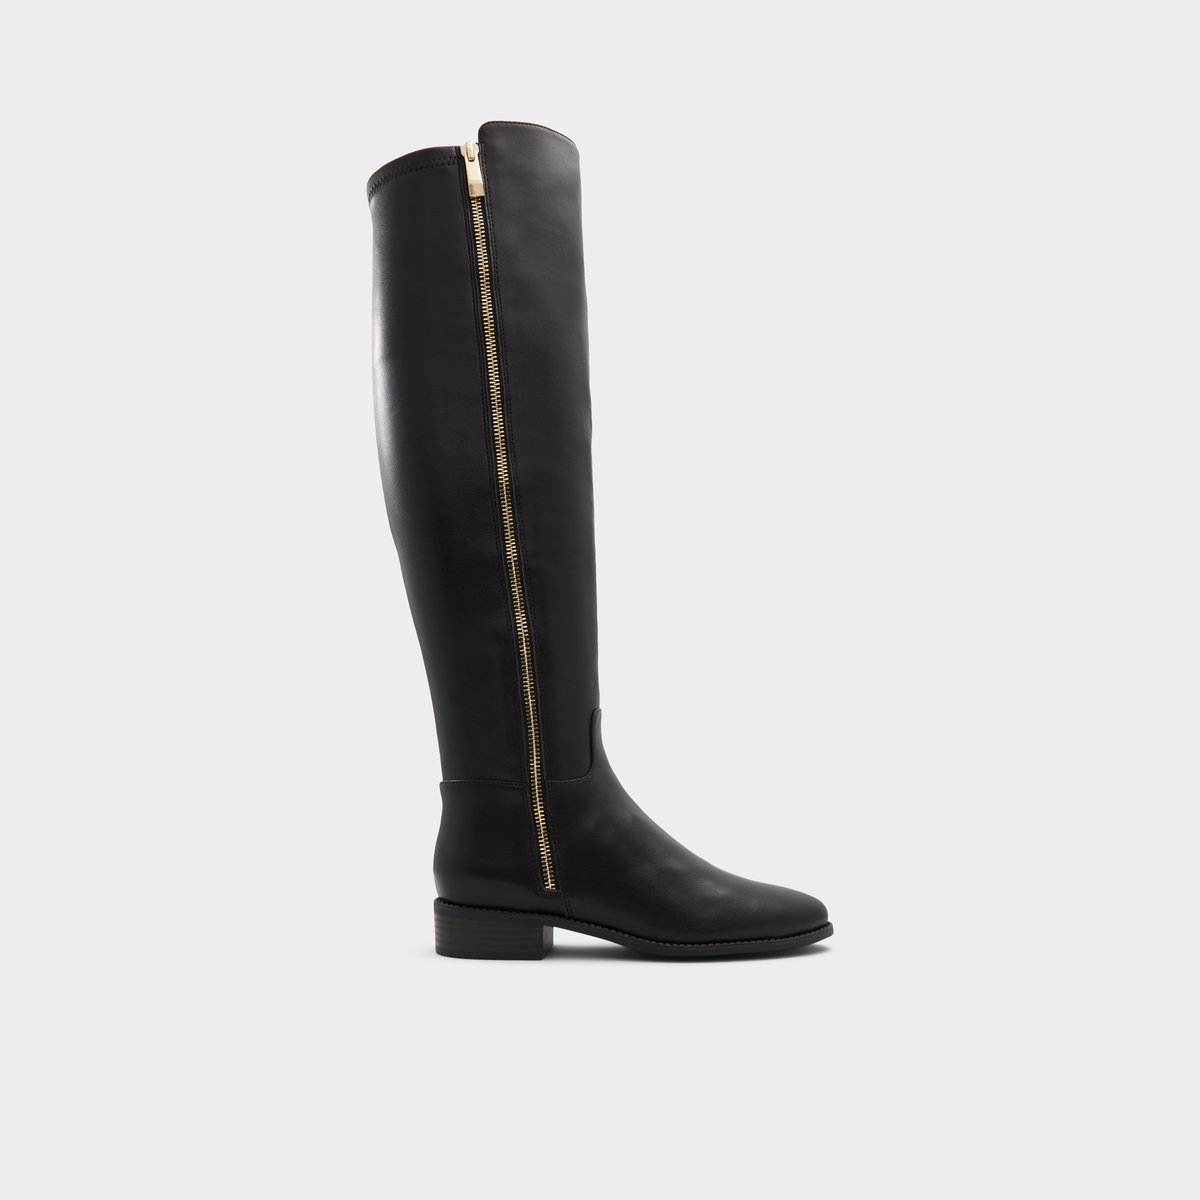 Aahliyah Black Overflow Women's Tall Boots | ALDO Canada